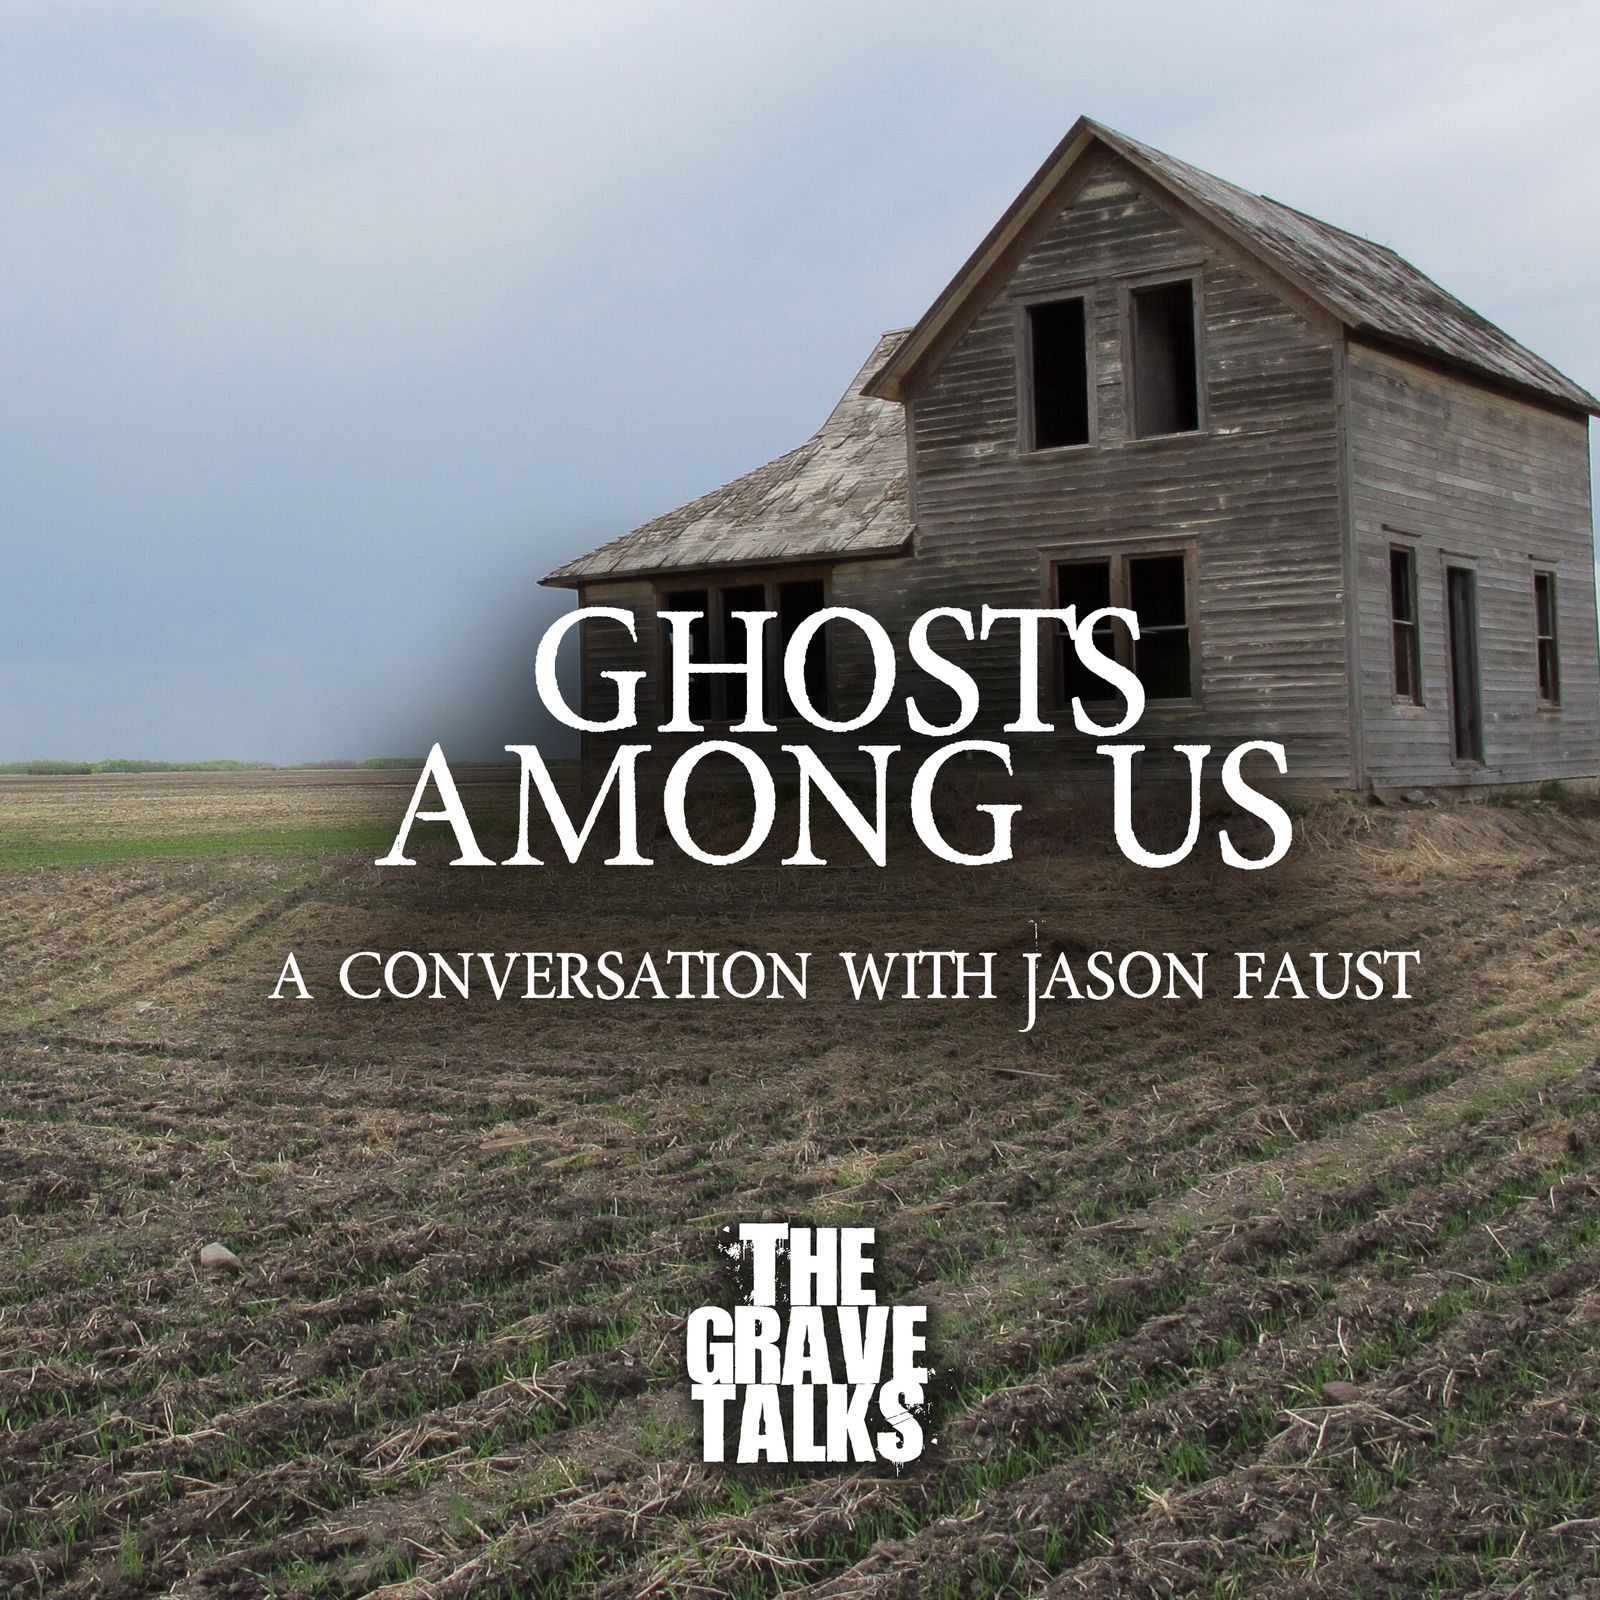 Ghosts Among Us | A Conversation With Jason Faust